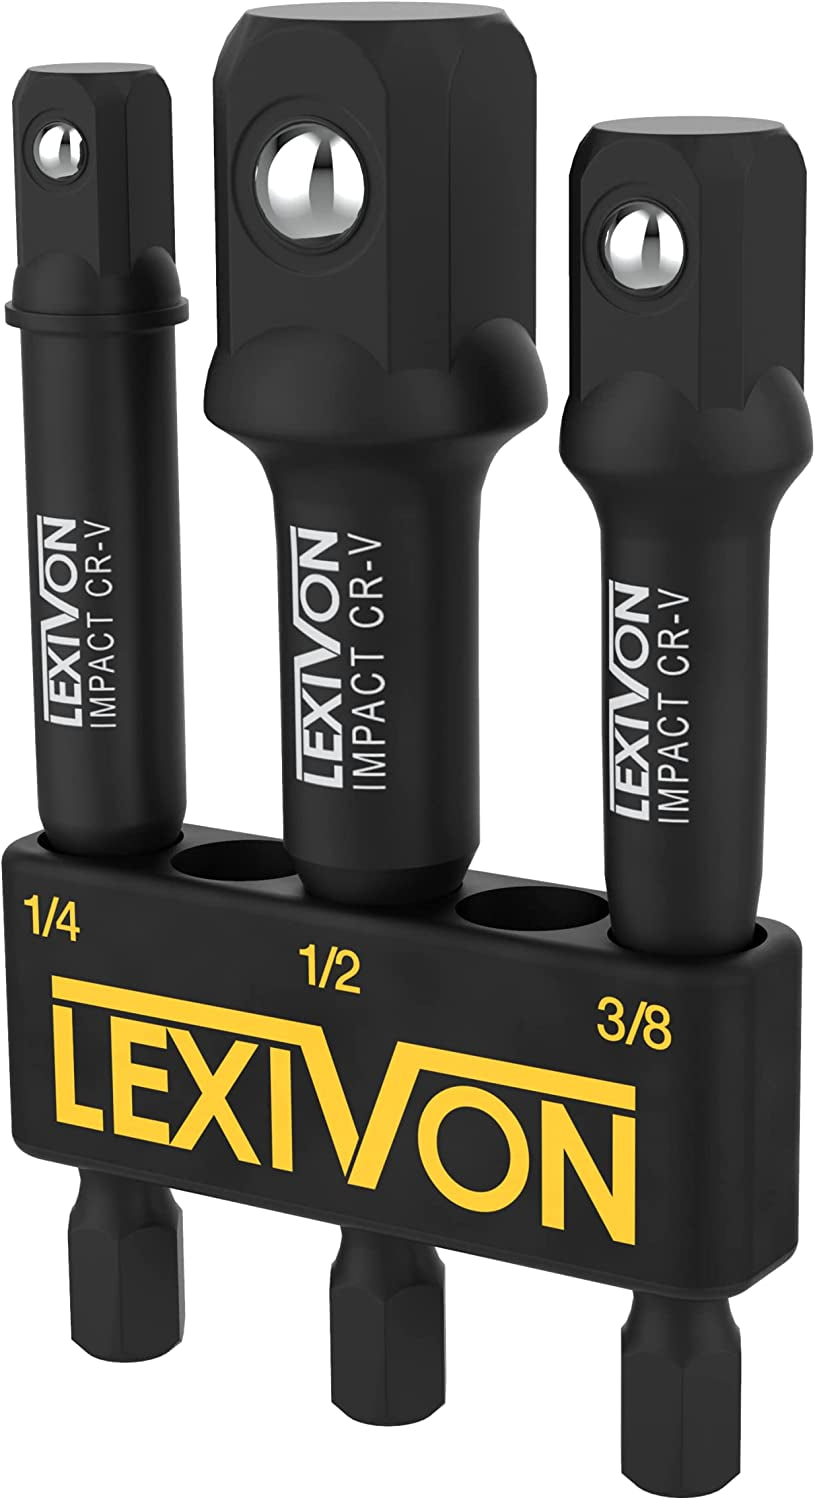 LEXIVON, LEXIVON Impact Grade Socket Adapter Set, 3" Extension Bit with Holder | 3-Piece 1/4", 3/8", and 1/2" Drive, Adapt Your Power Drill to High Torque Impact Wrench (LX-101)